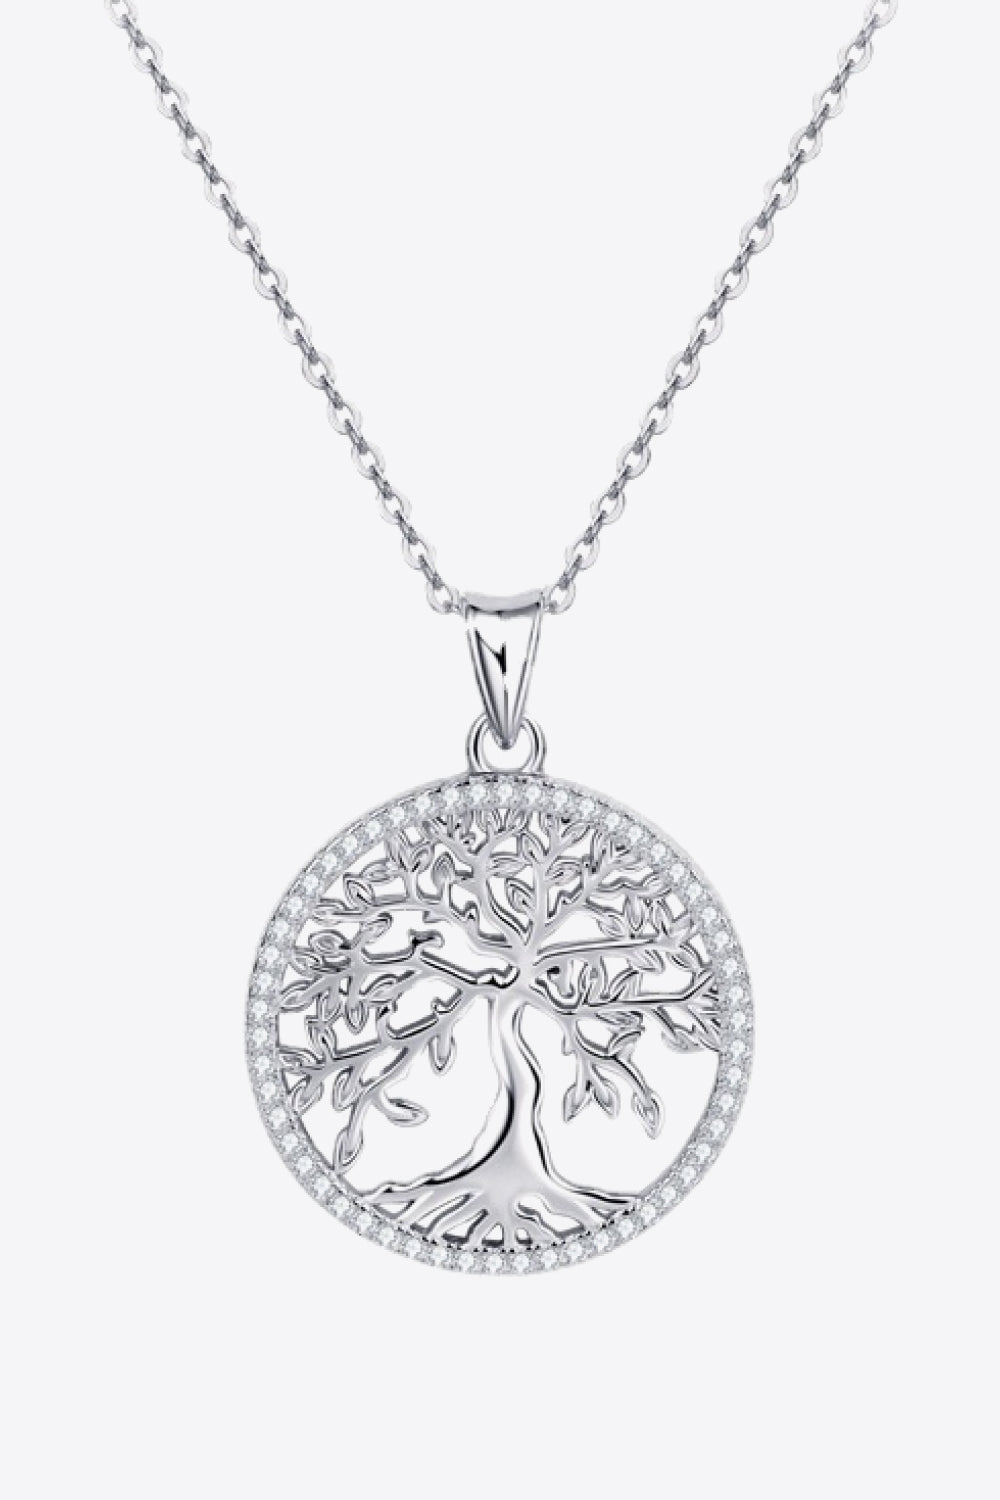 Jerry's Apparel Chain Necklaces Silver / One Size 925 Sterling Silver Moissanite Tree Pendant Necklace